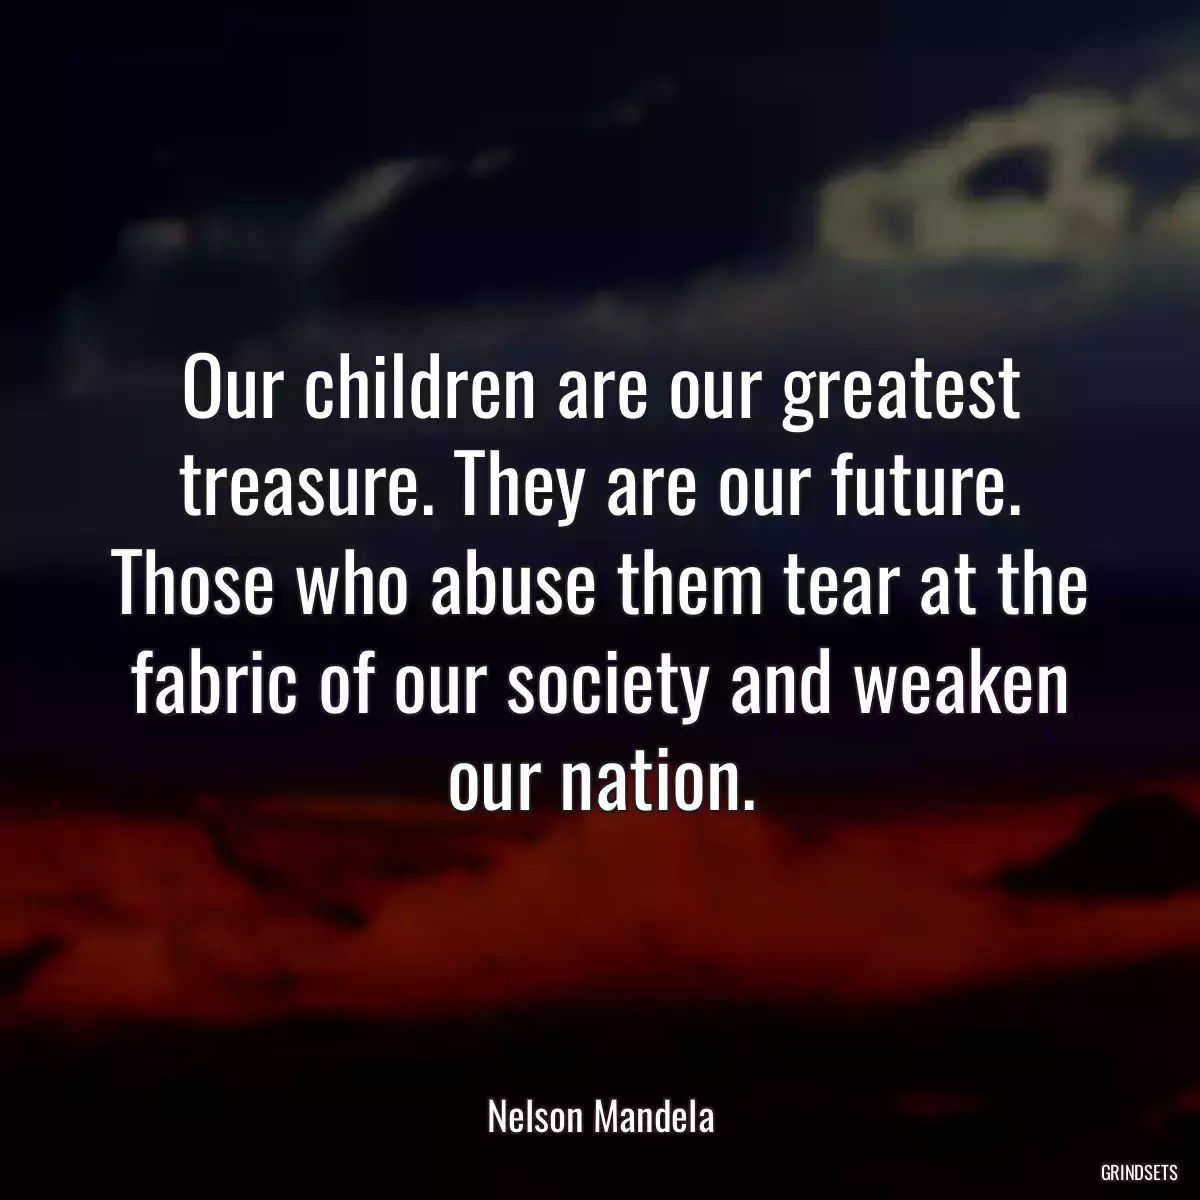 Our children are our greatest treasure. They are our future. Those who abuse them tear at the fabric of our society and weaken our nation.